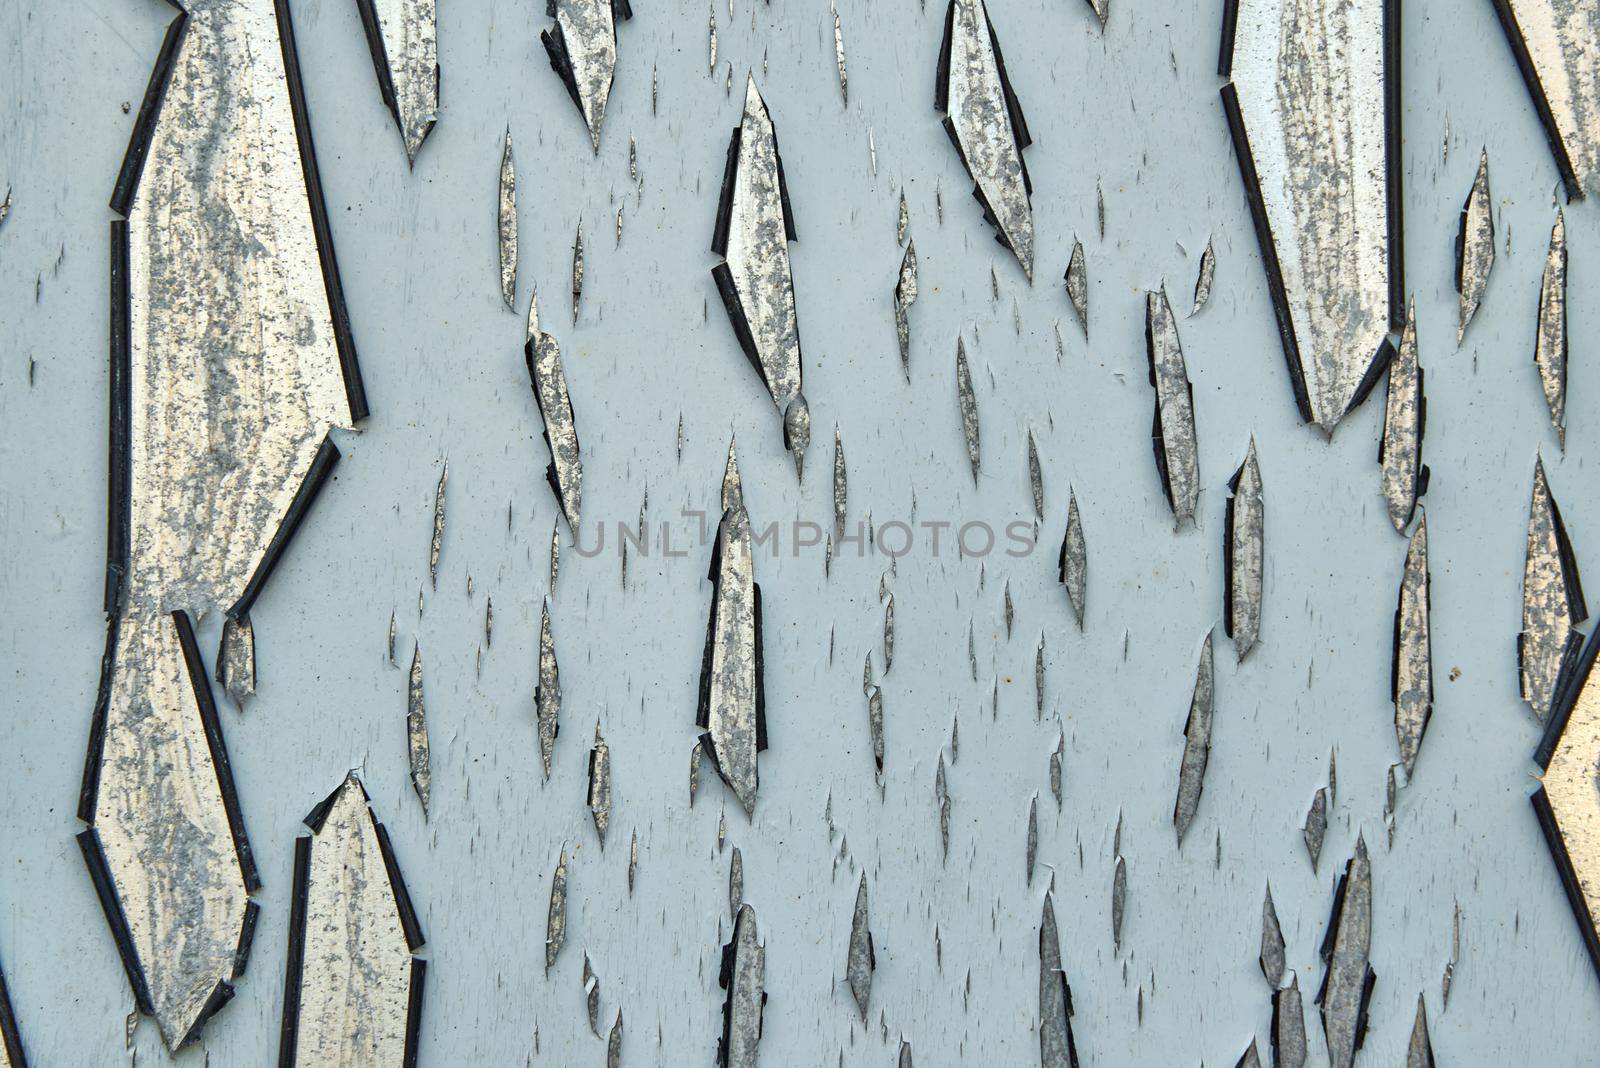 Grey paint cracks and peels off of a reflective metallic surface